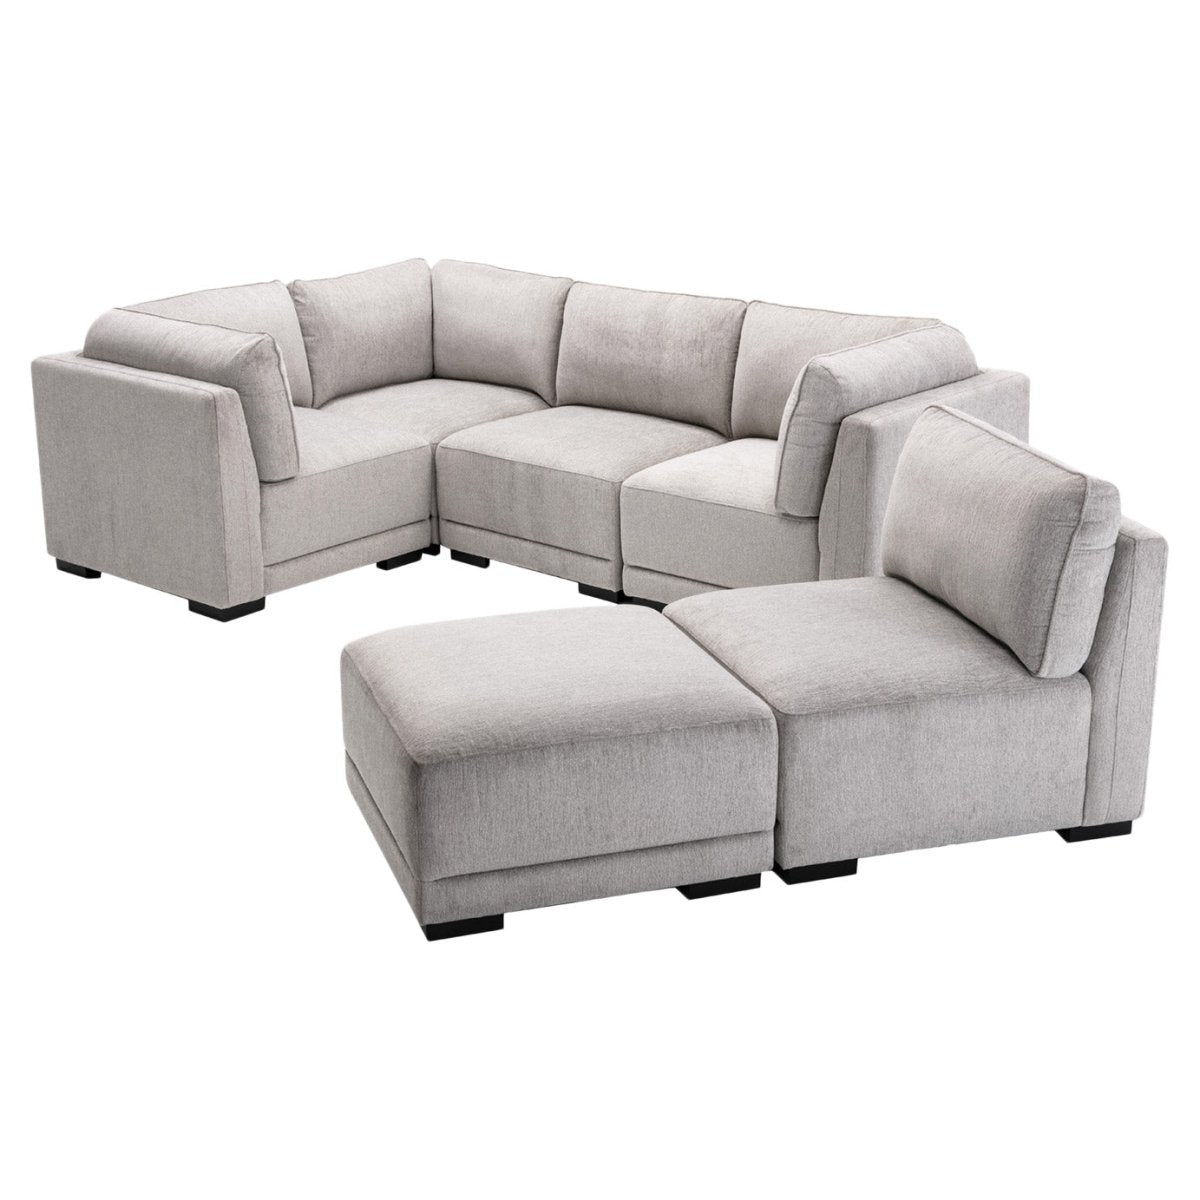 Belize Fabric Sectional - Alpine Outlets